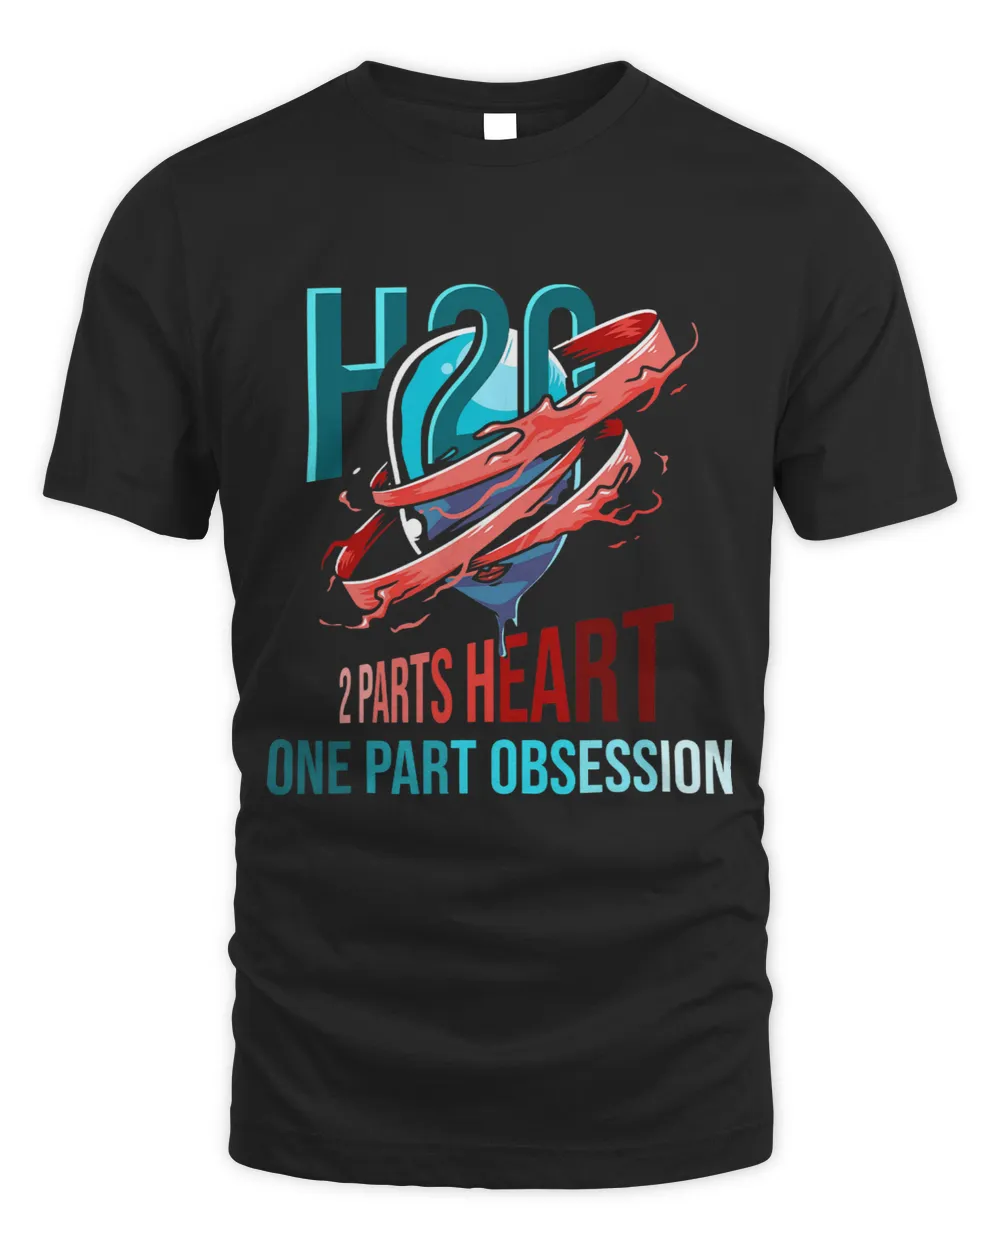 H2O 2 parts heart one part obsession